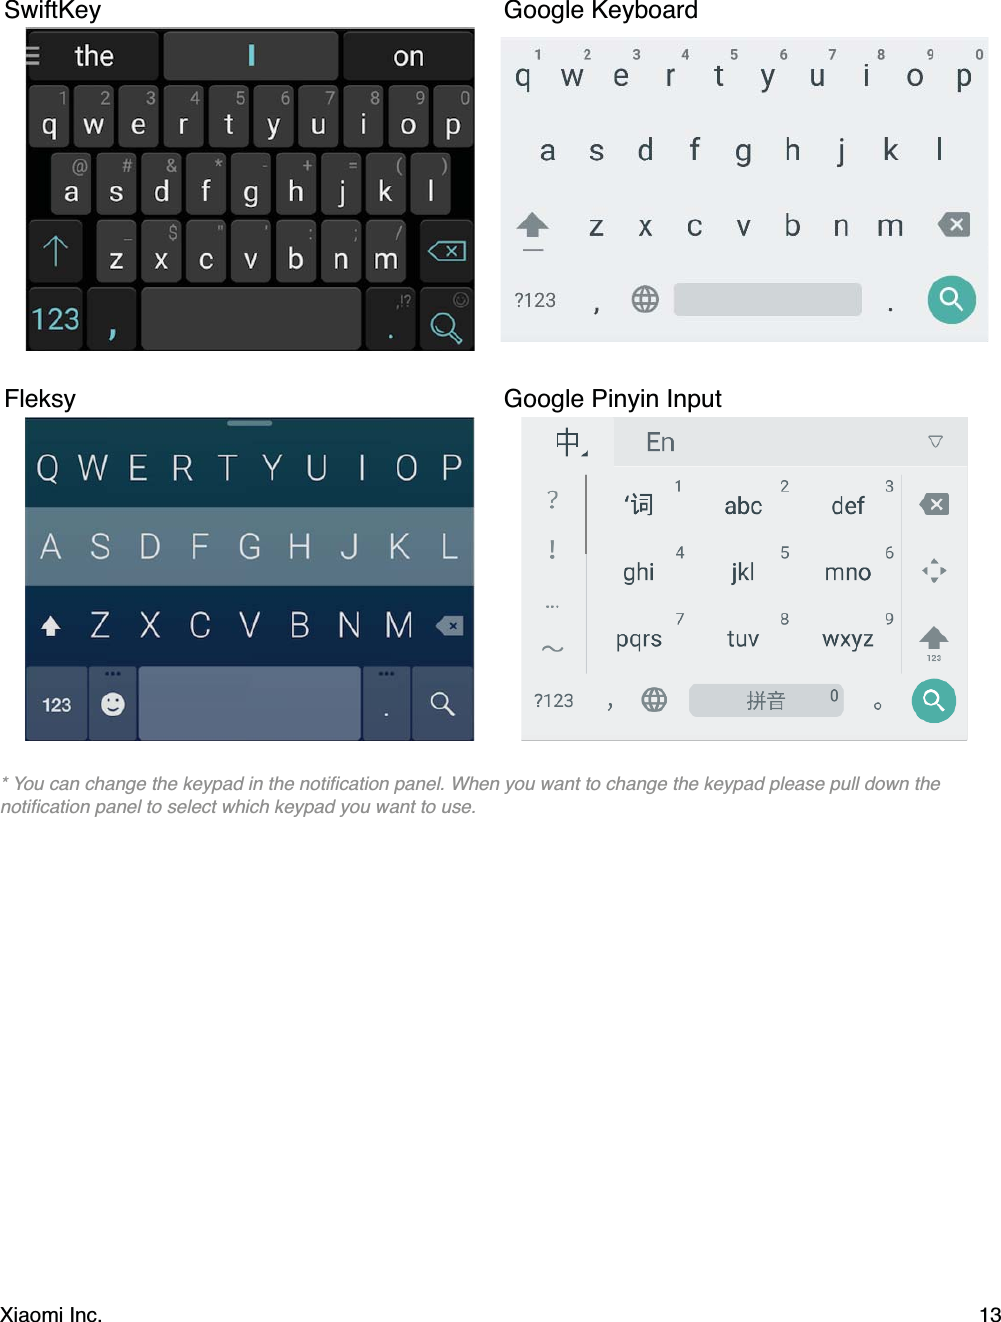 * You can change the keypad in the notiﬁcation panel. When you want to change the keypad please pull down thenotiﬁcation panel to select which keypad you want to use.SwiftKey Google KeyboardFleksy  Google Pinyin InputXiaomi Inc.  13